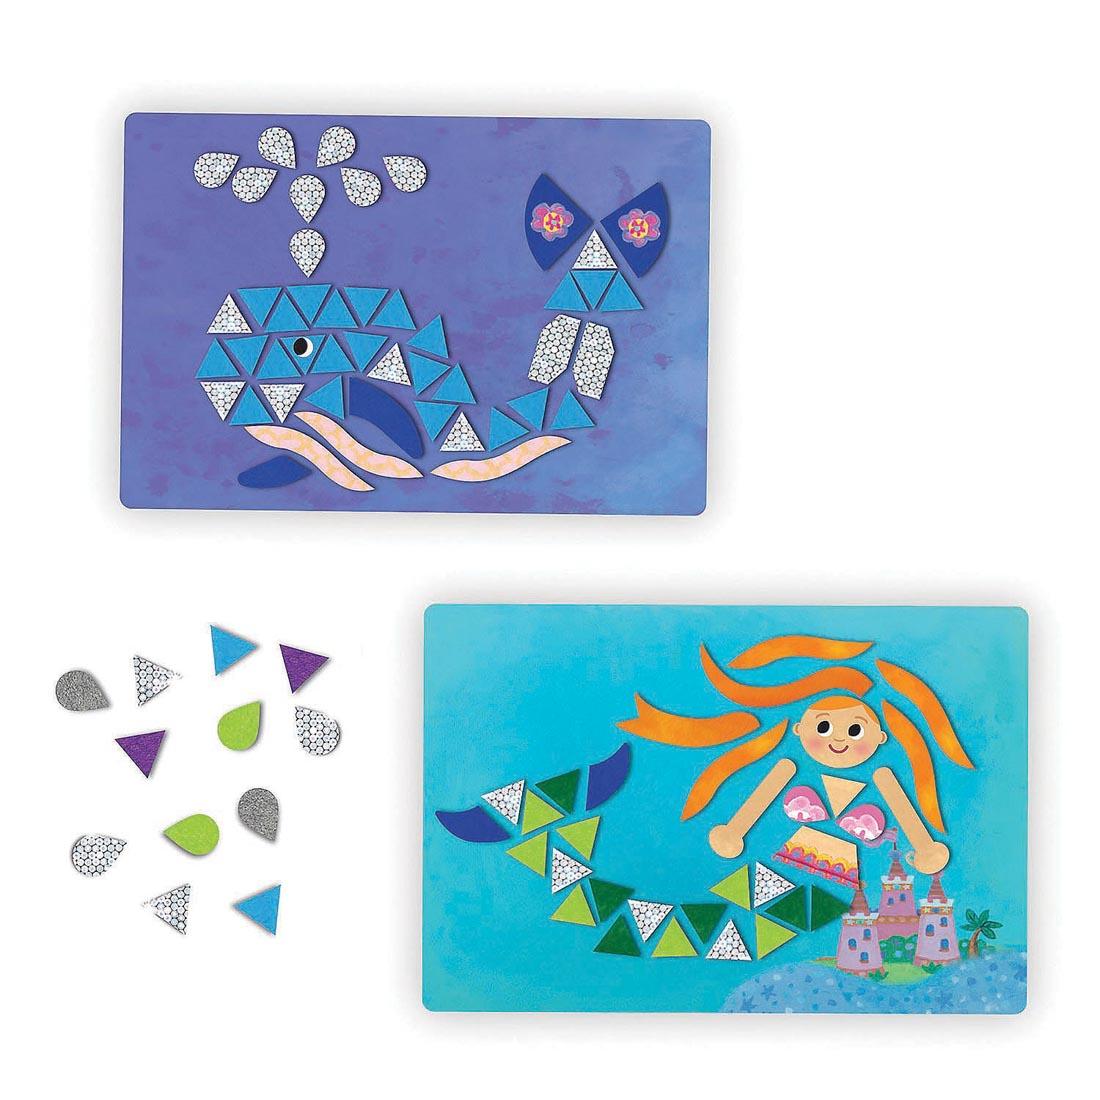 creations made with the Mermaid Island Sparkle Mosaics by Peaceable Kingdom